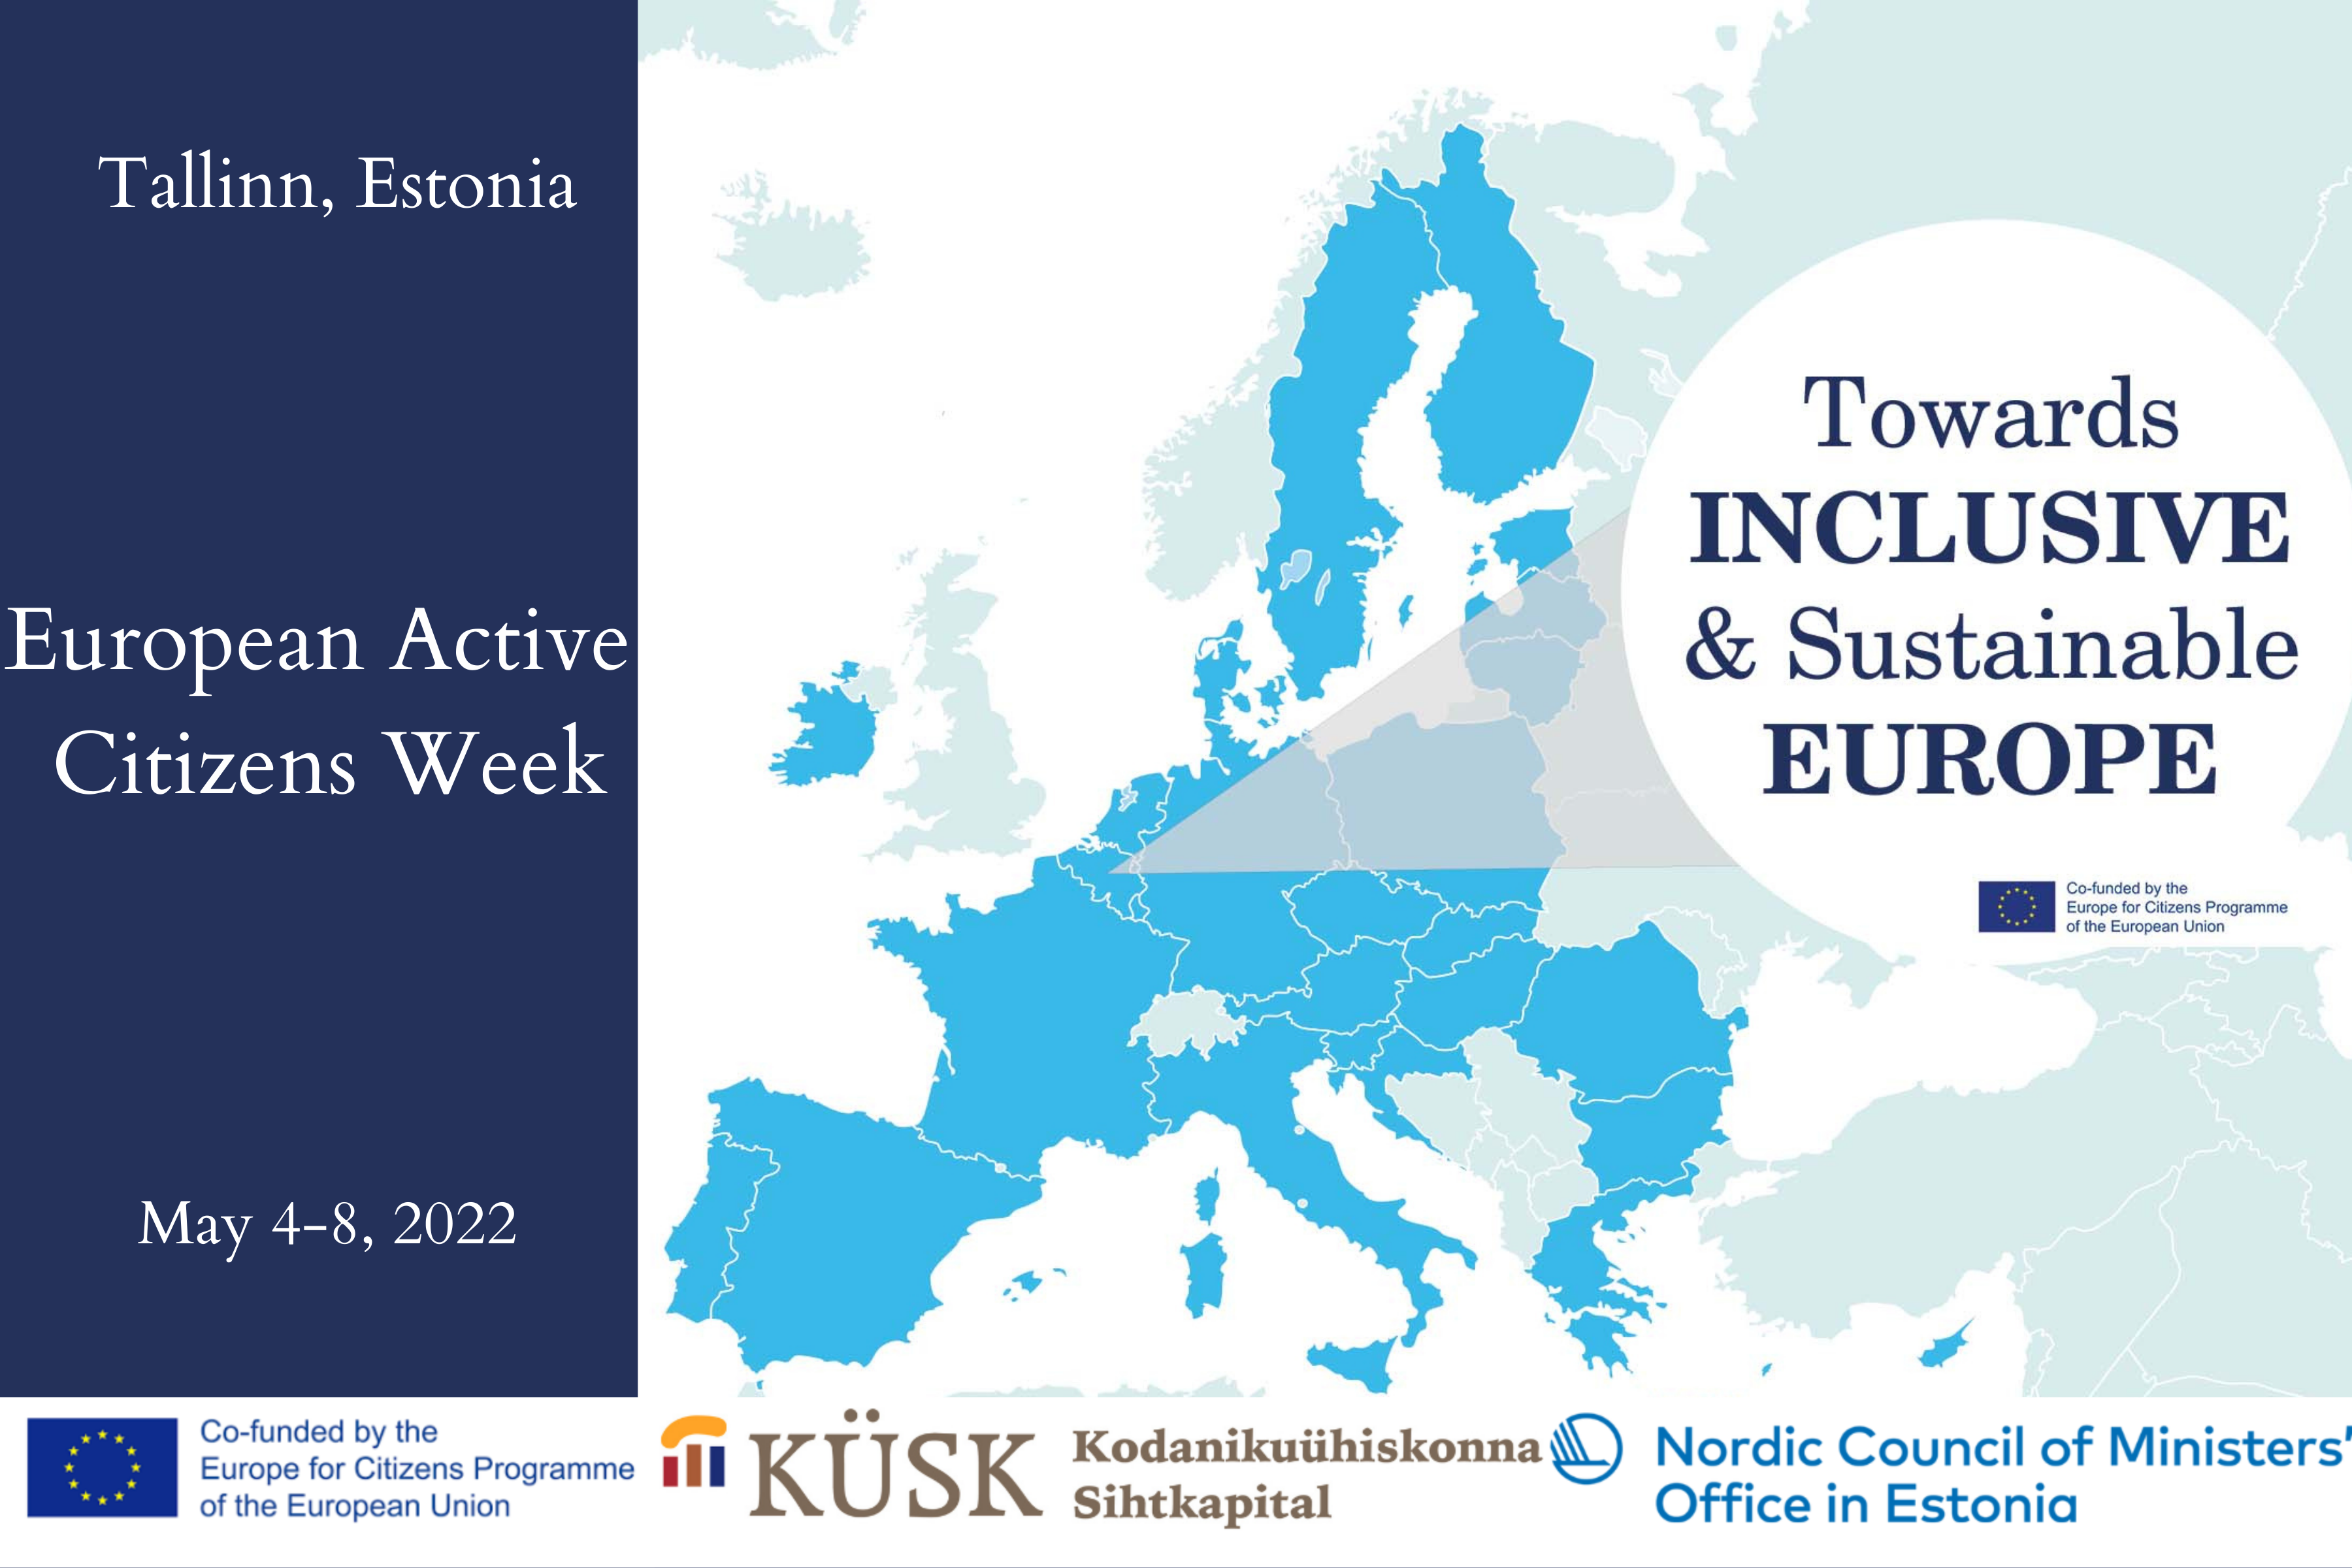 The upcoming final event “European Active Citizens Week/Festival”